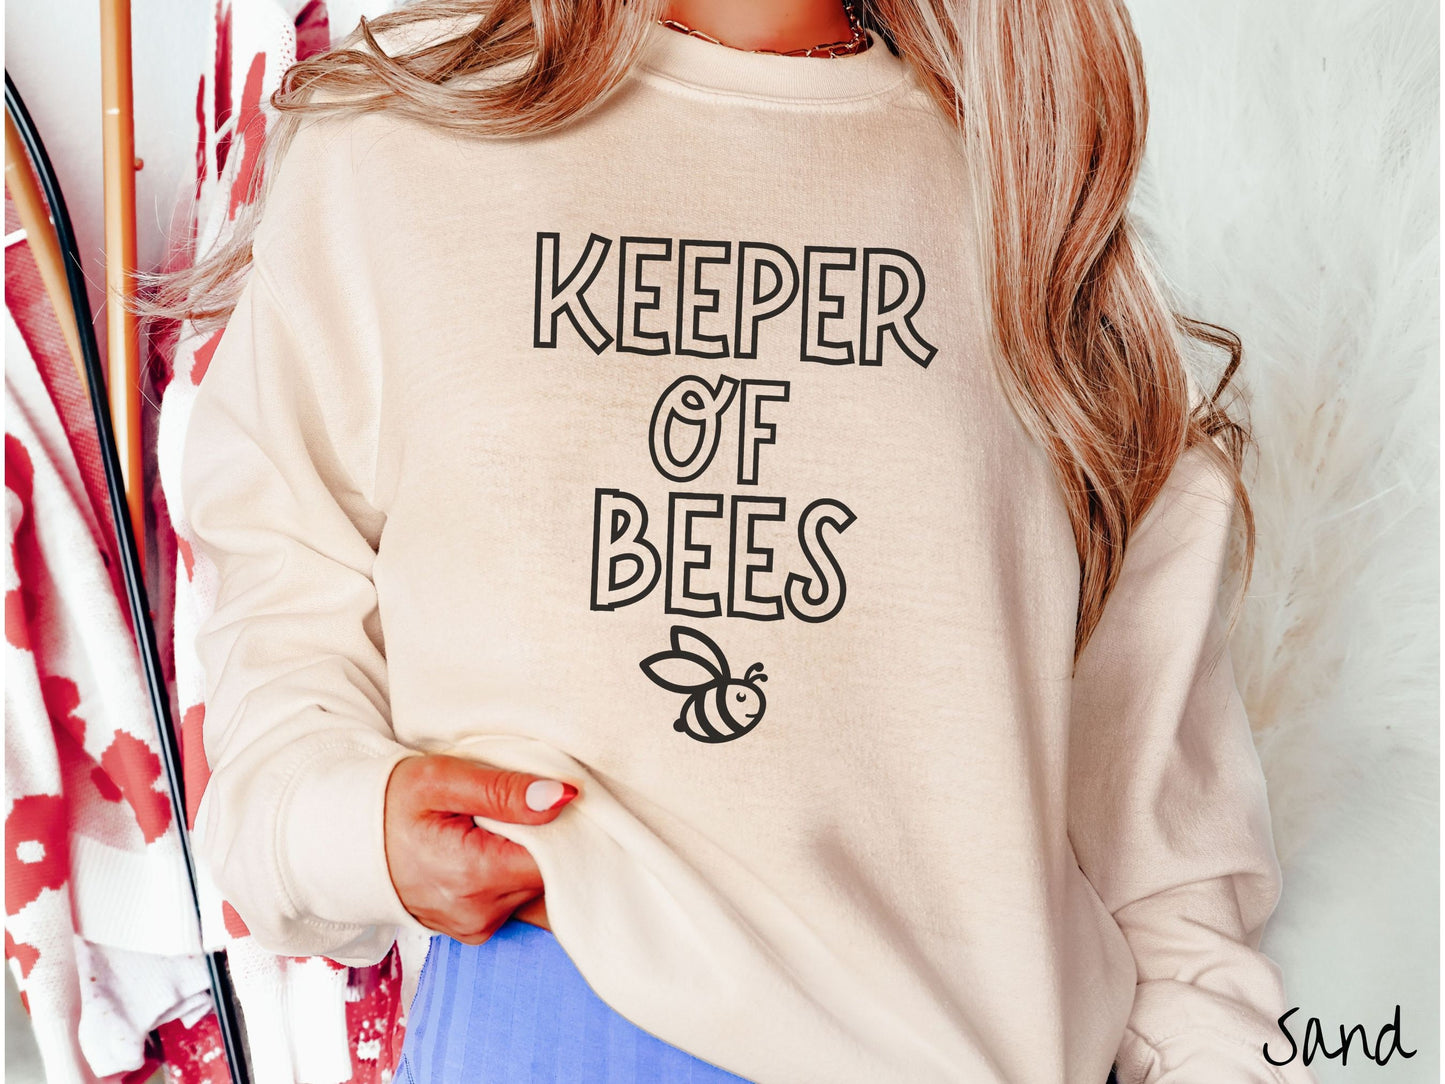 The Keeper of Bees Sweatshirt, Gift this Beekeeping Sweater to the Beekeeper in your Life!